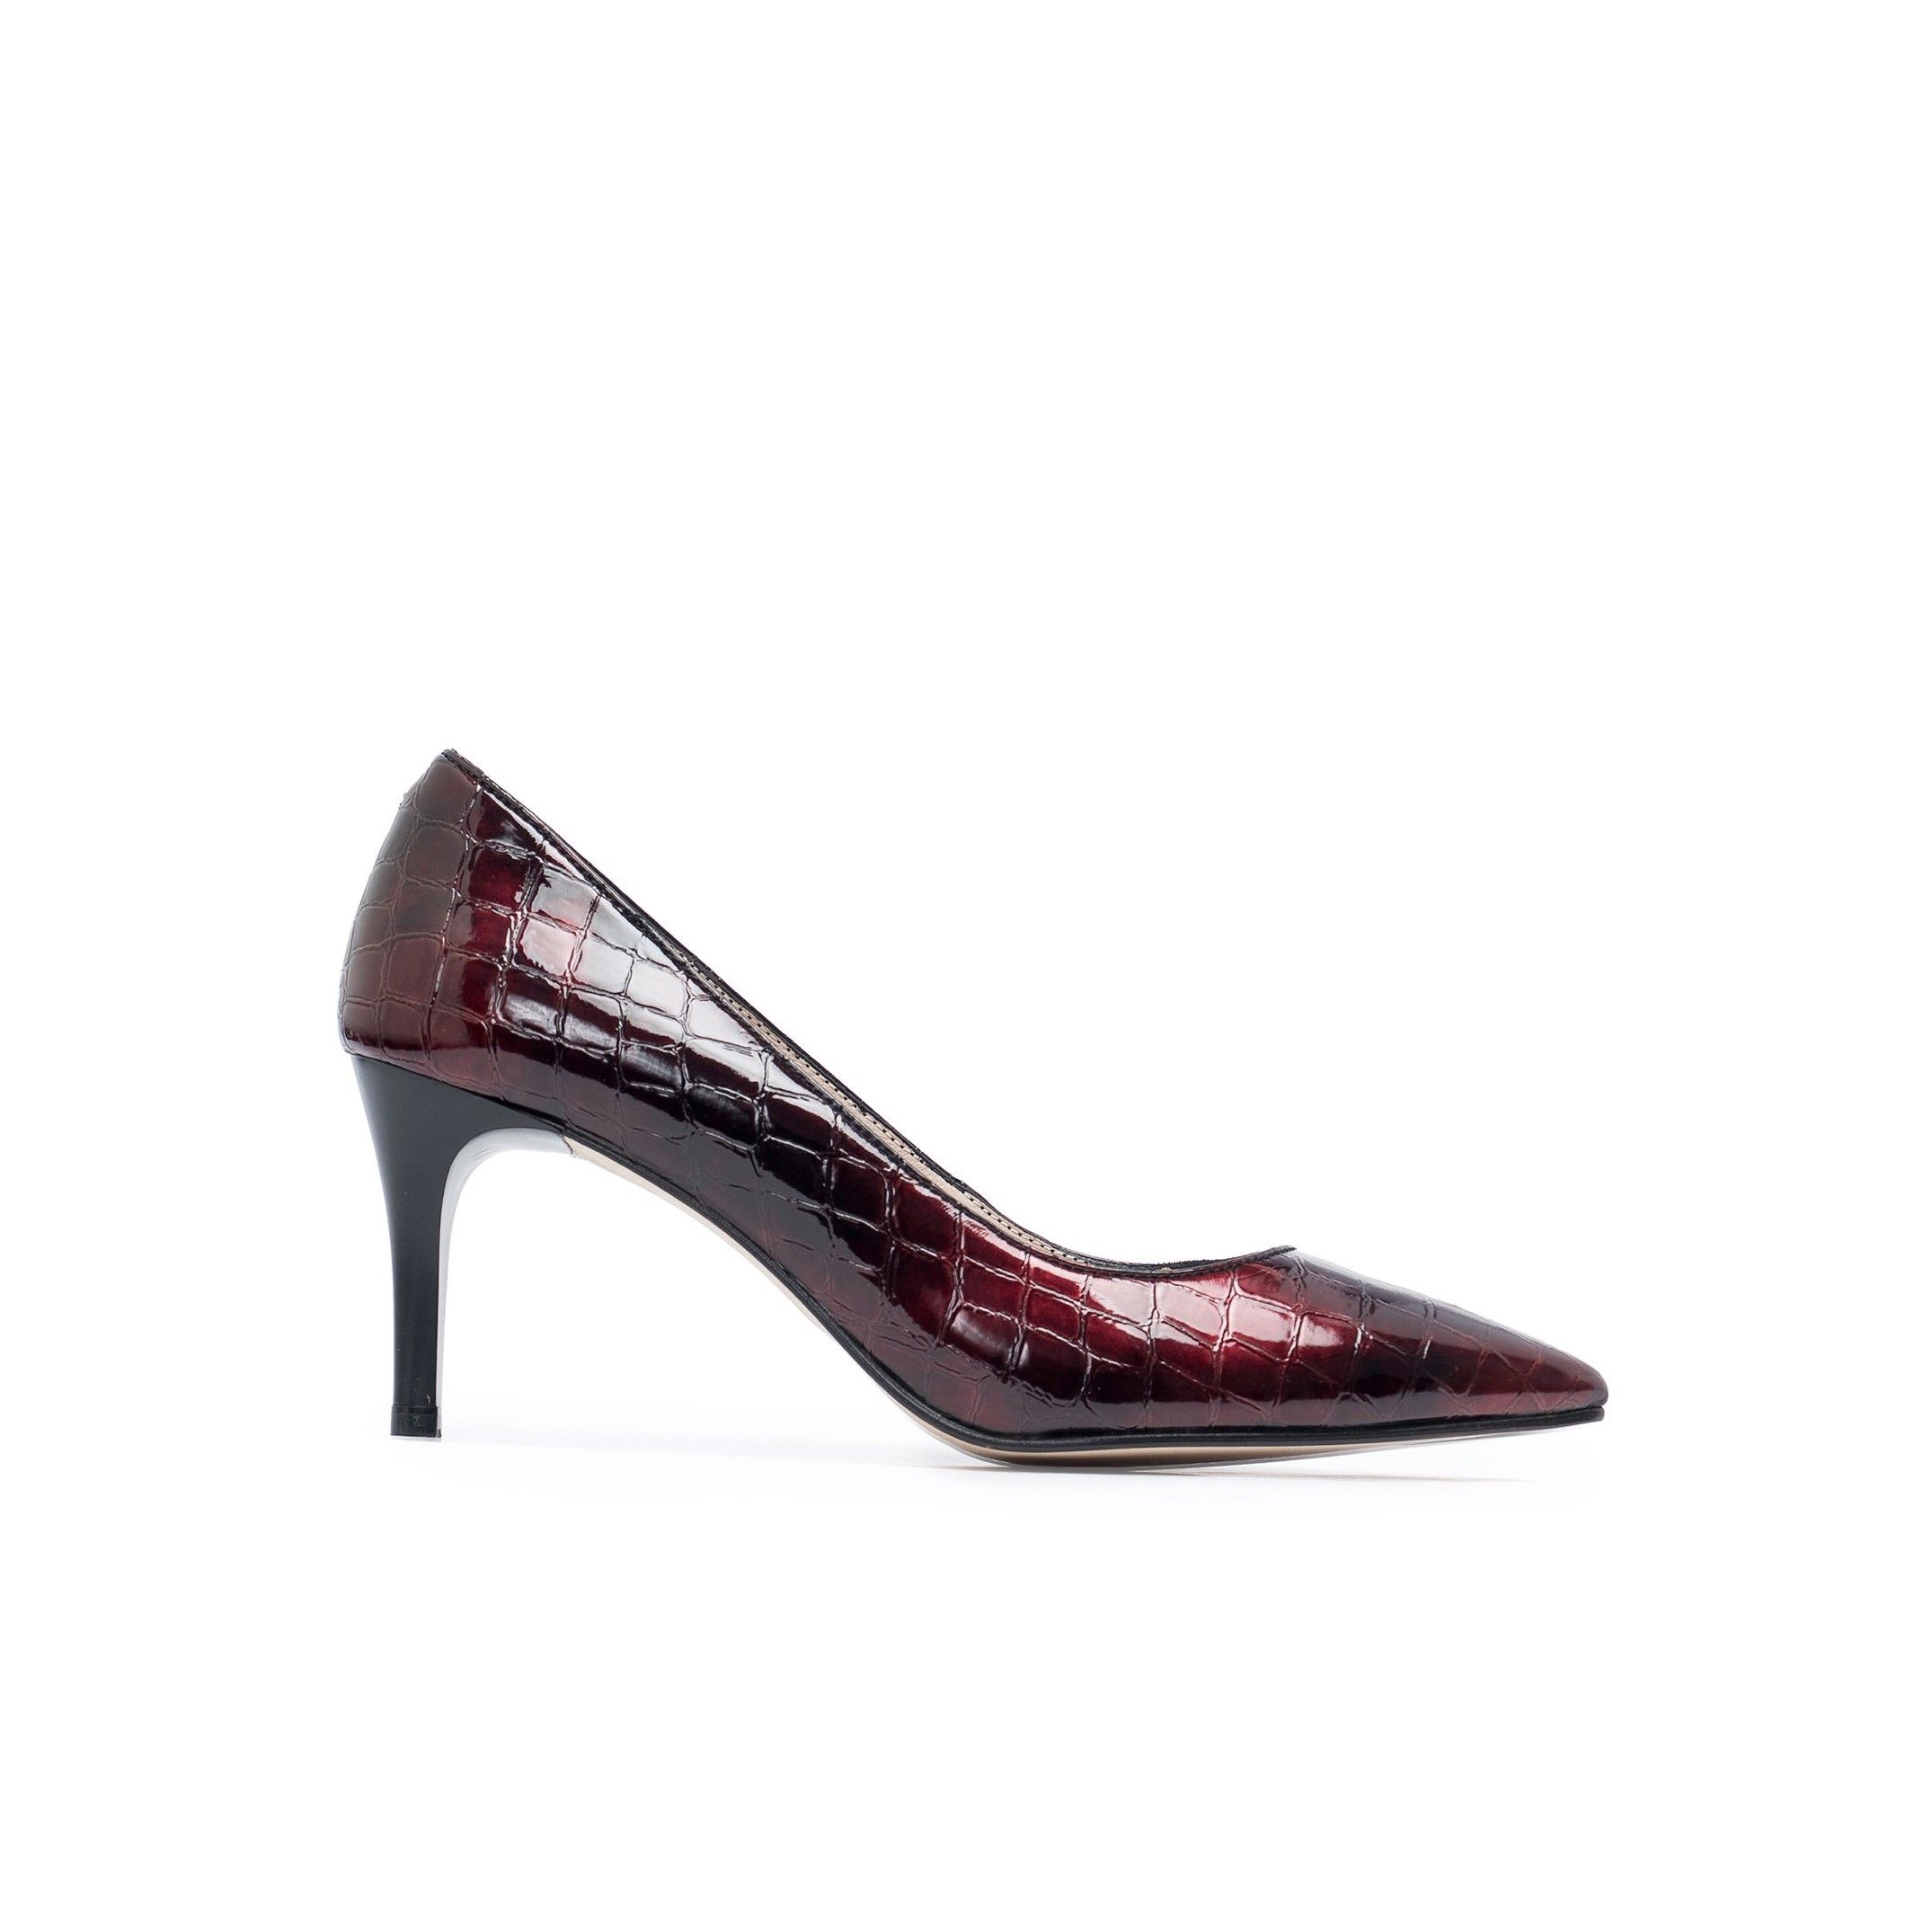 Closed-toe pumps for women, by Son Castellanisimos. Upper made of leatherette. Inner lining and insole made of pig leather. Sole material: synthetic. Heel height: 7 cm. Designed and made in Spain.